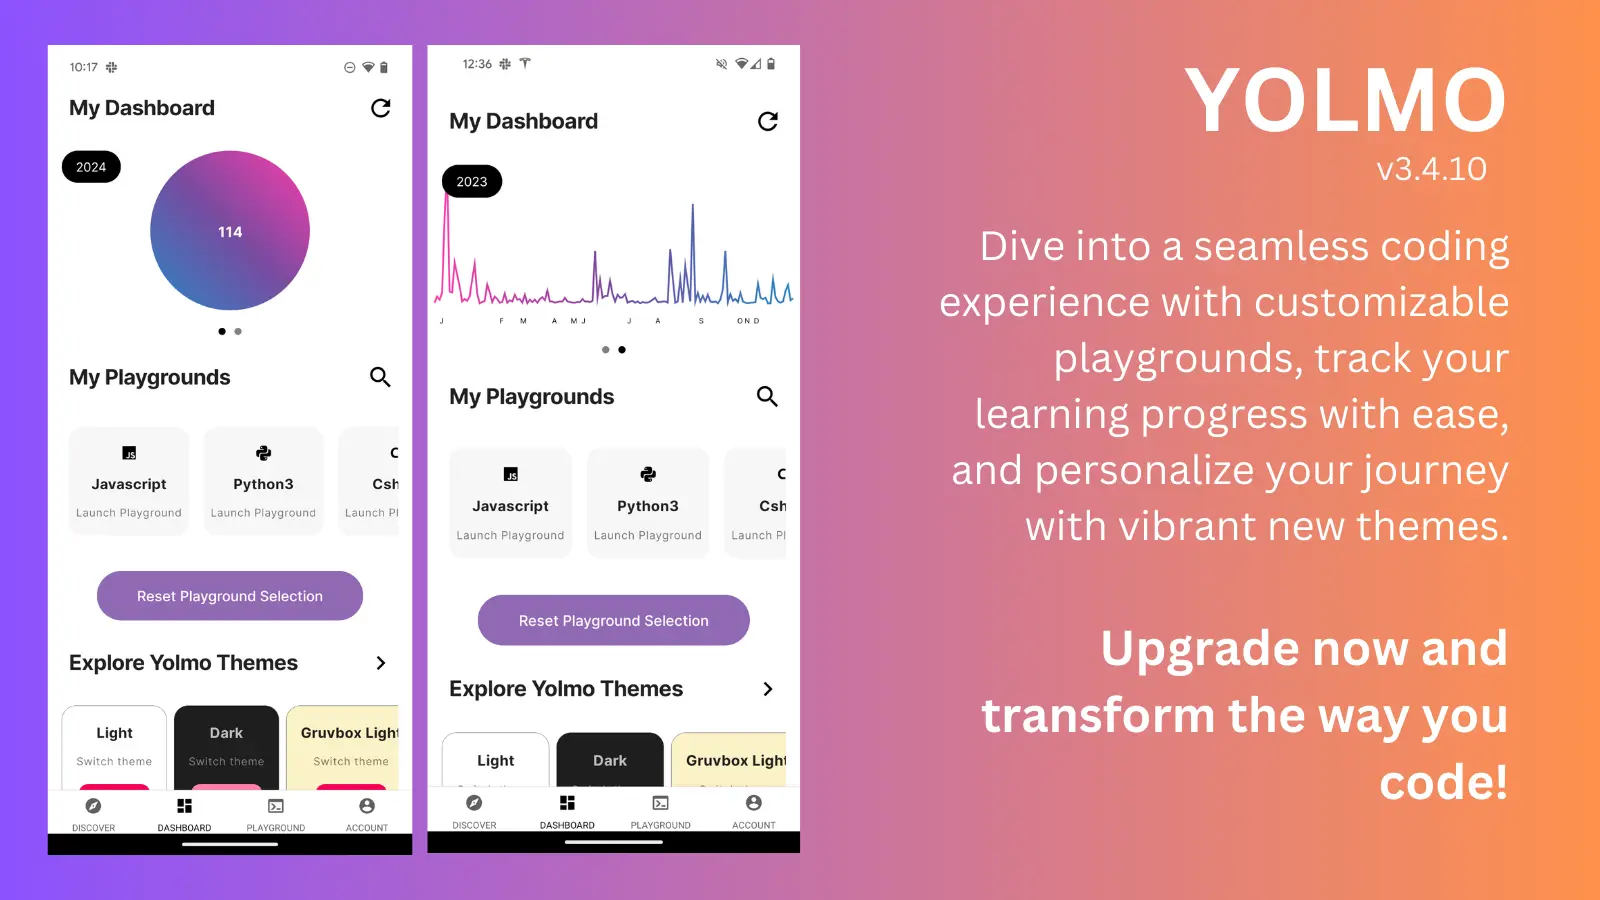 Dive into a seamless coding experience with customizable playgrounds, track your learning progress with ease, and personalize your journey with vibrant new themes.